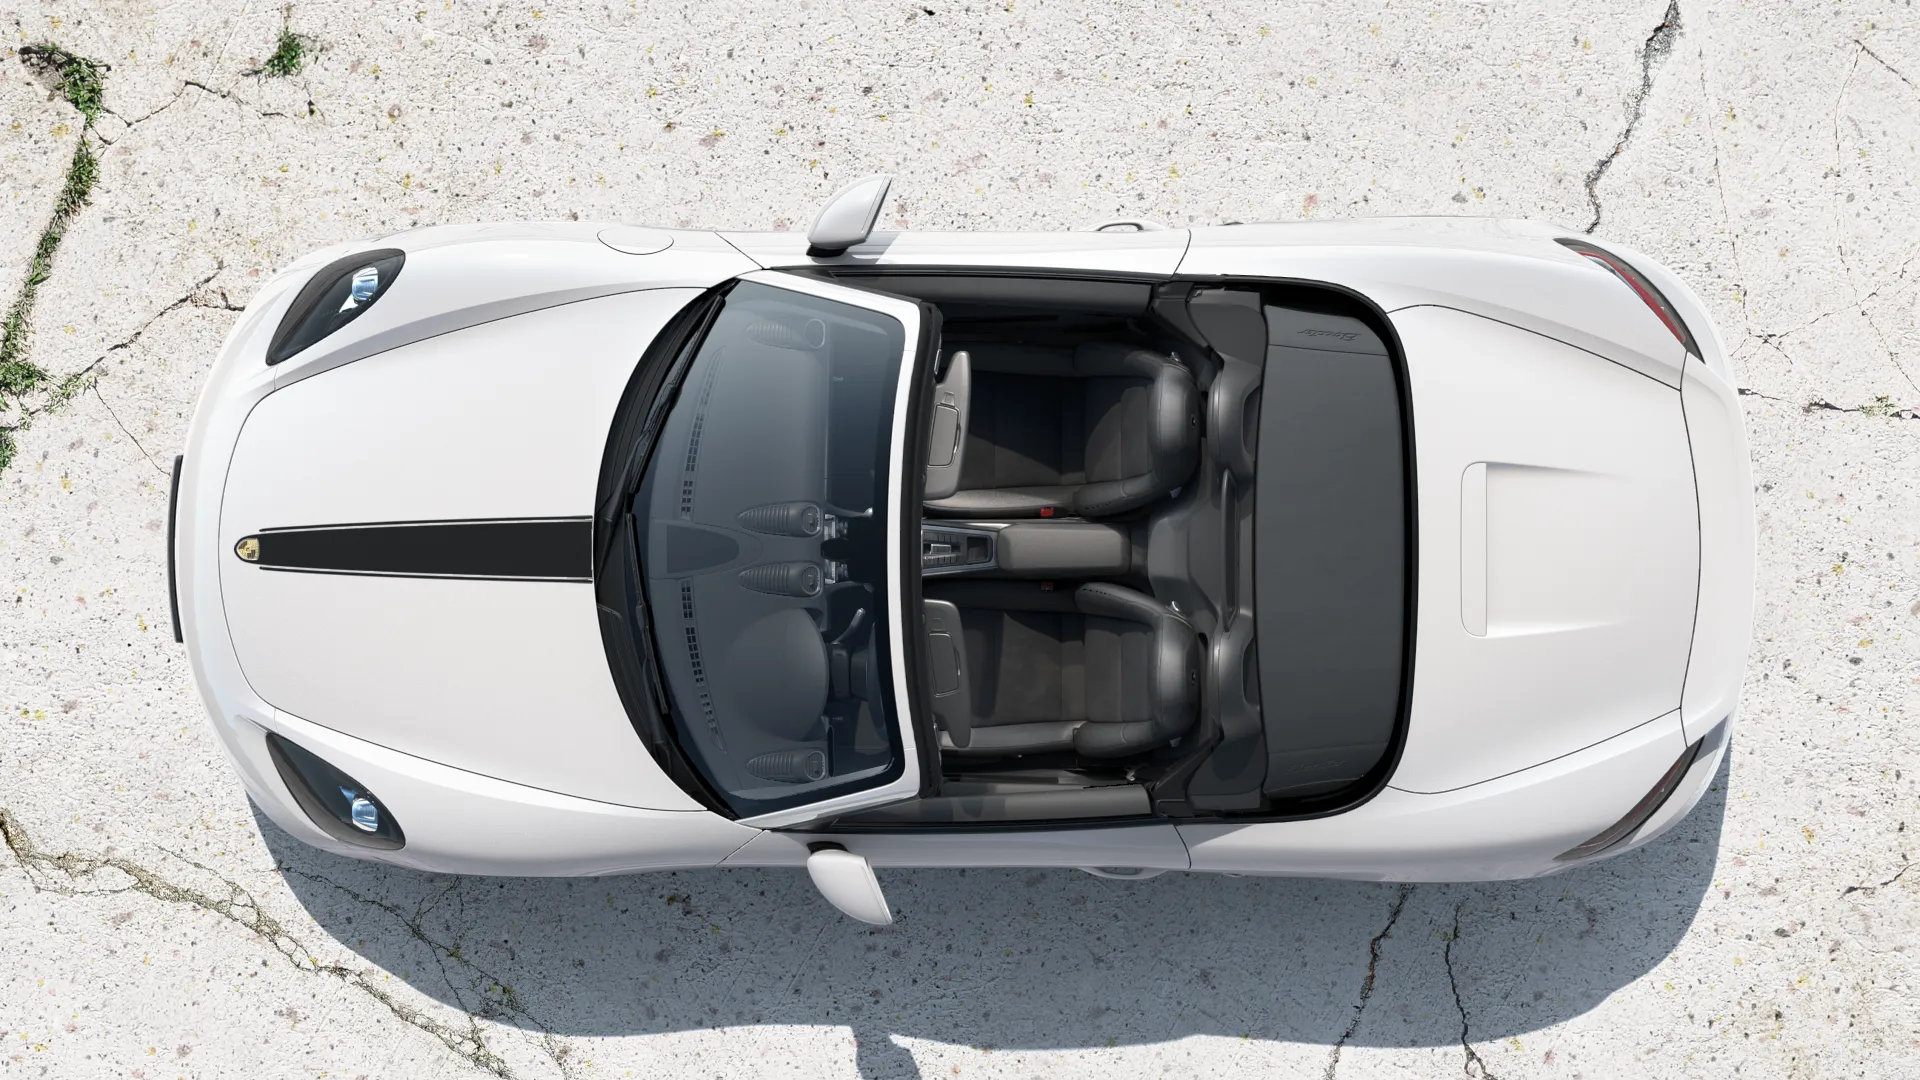 Exterior view of 718 Boxster Style Edition